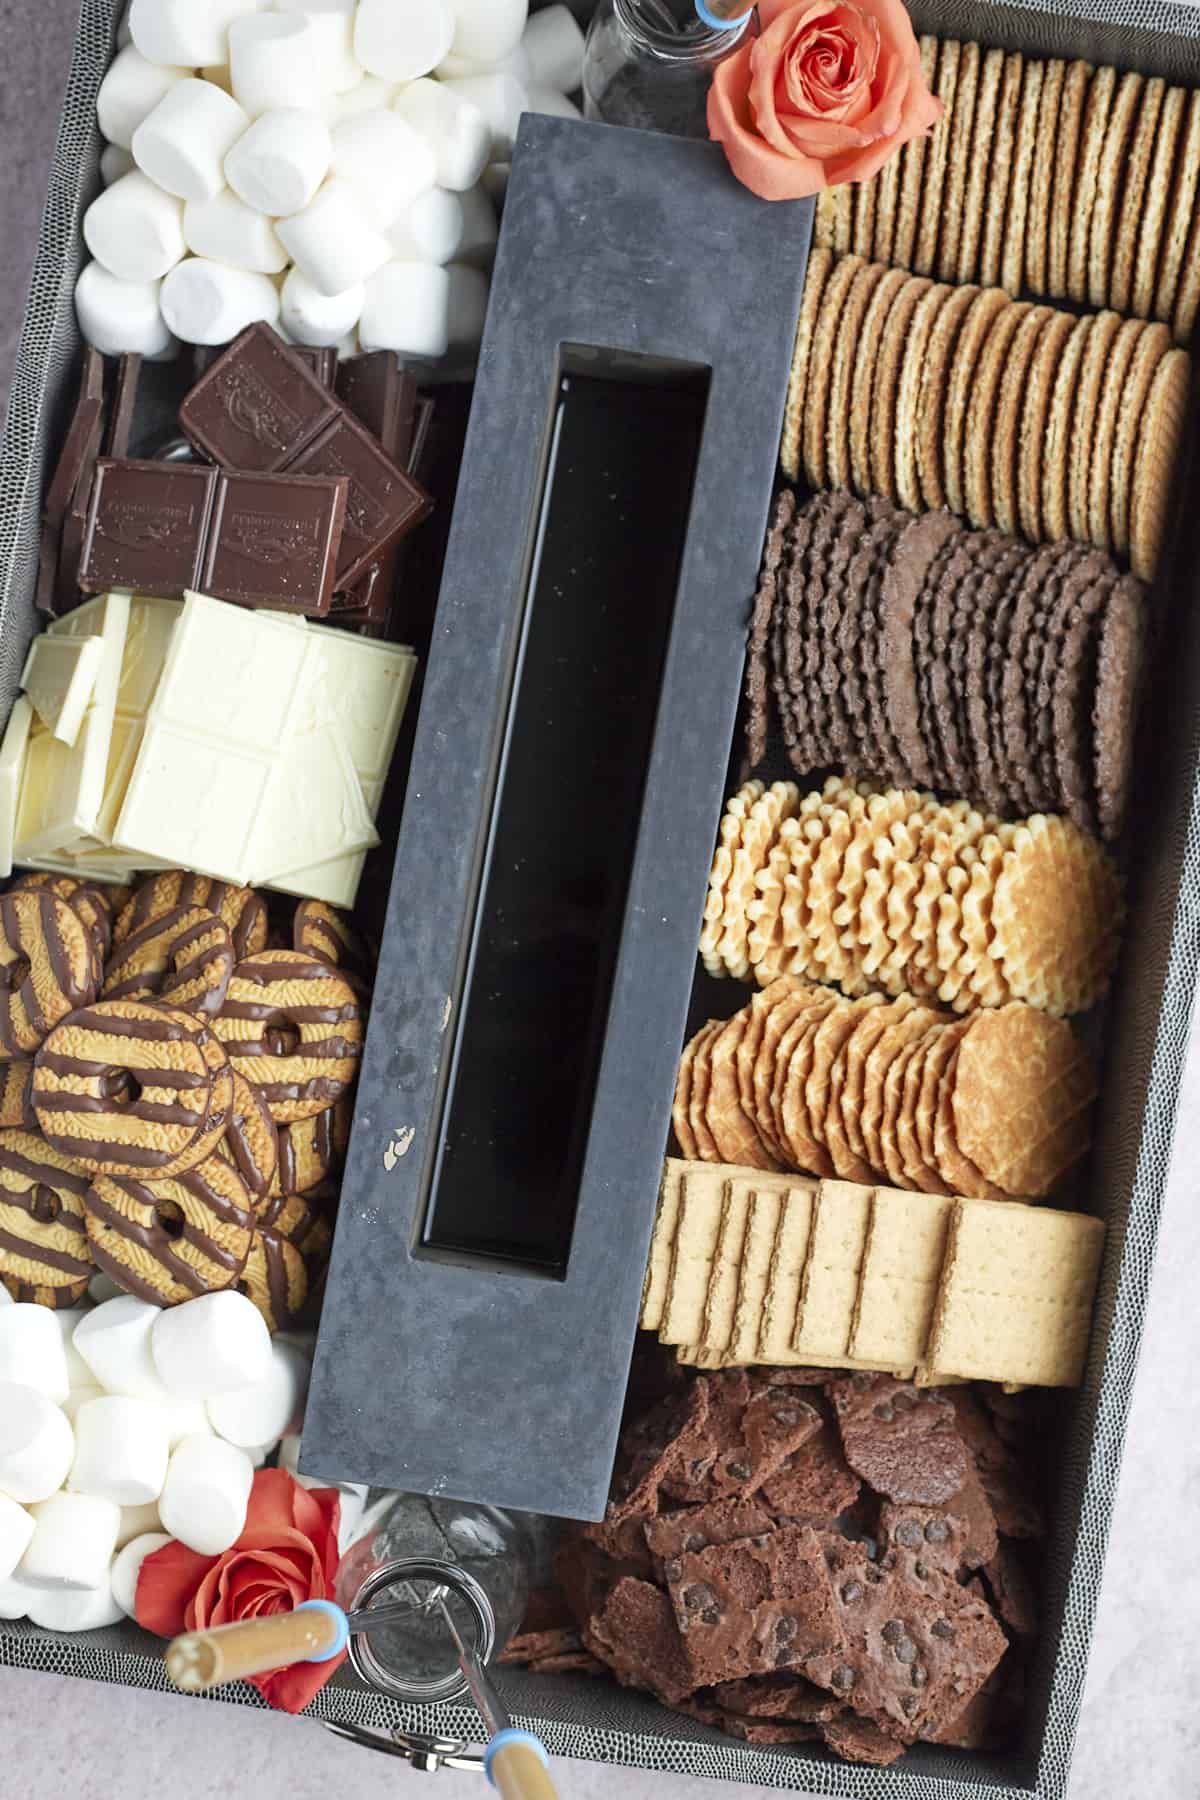 indoor smores board made with a portable fire pit, cookies, marshmallows, chocolate, and more